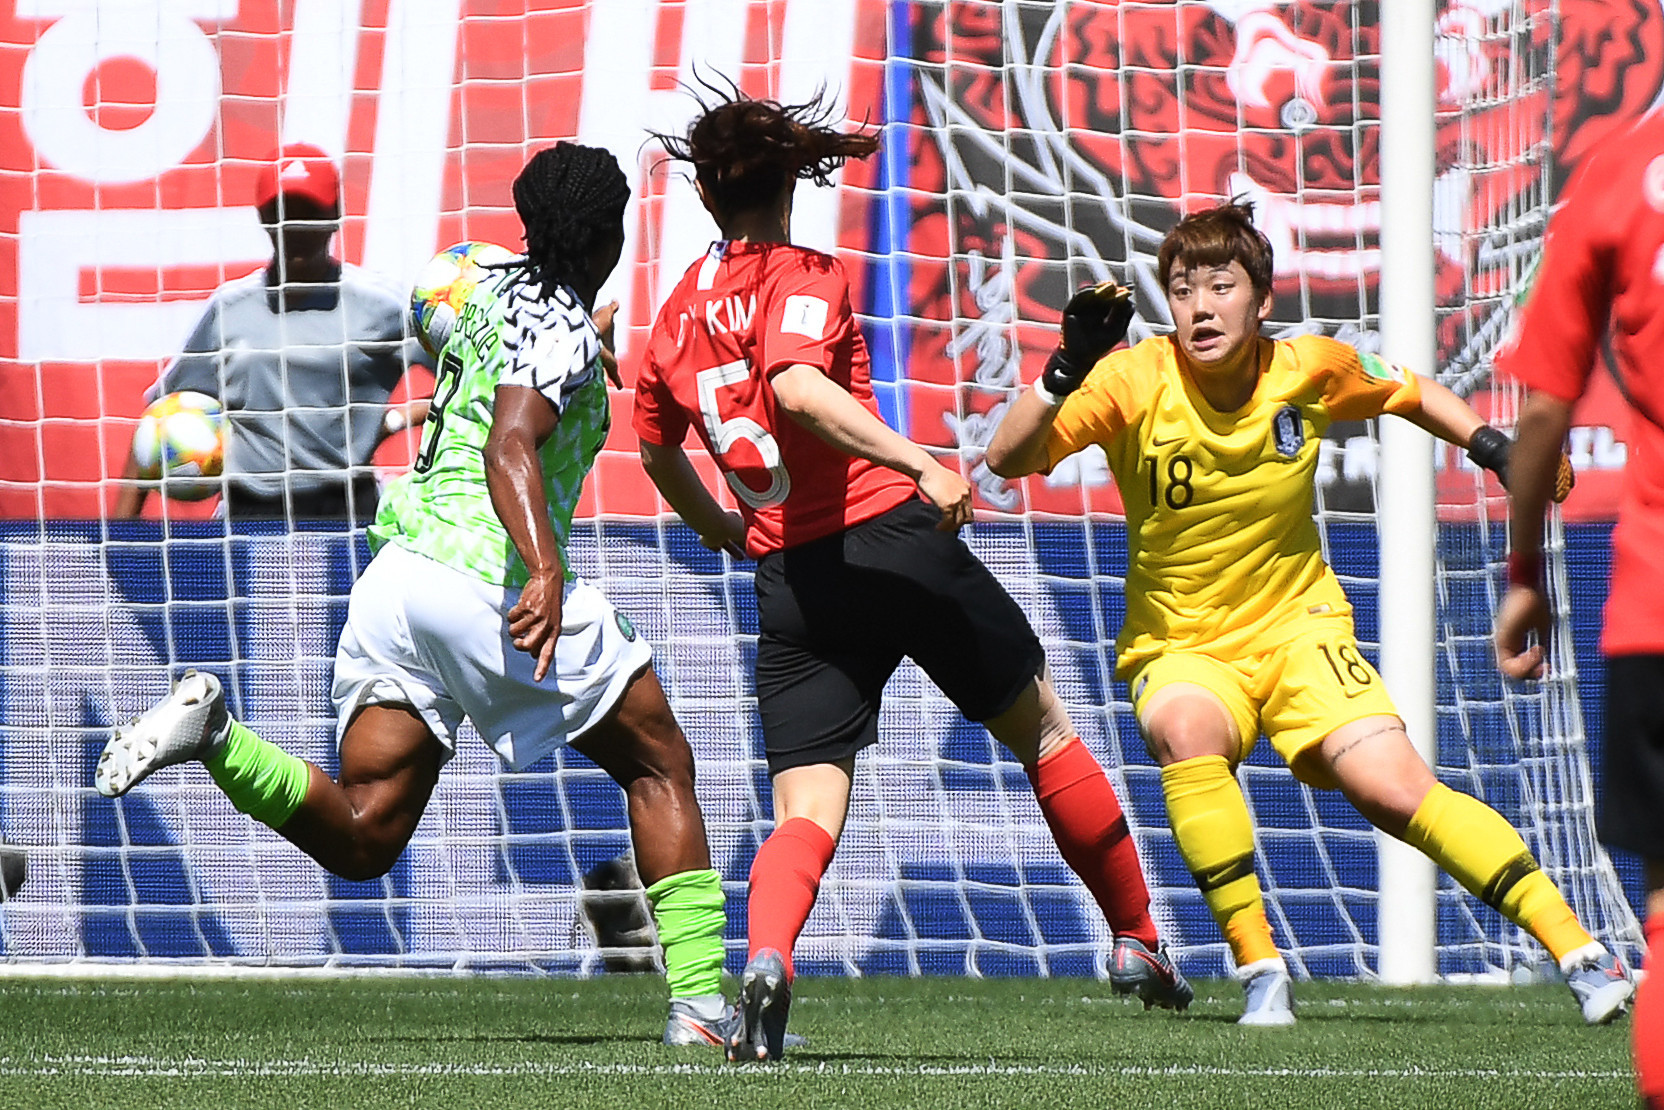 In a clash between Nigeria and South Korea, Kim Do-yeon scored an own goal to put Nigeria ahead ©Getty Images